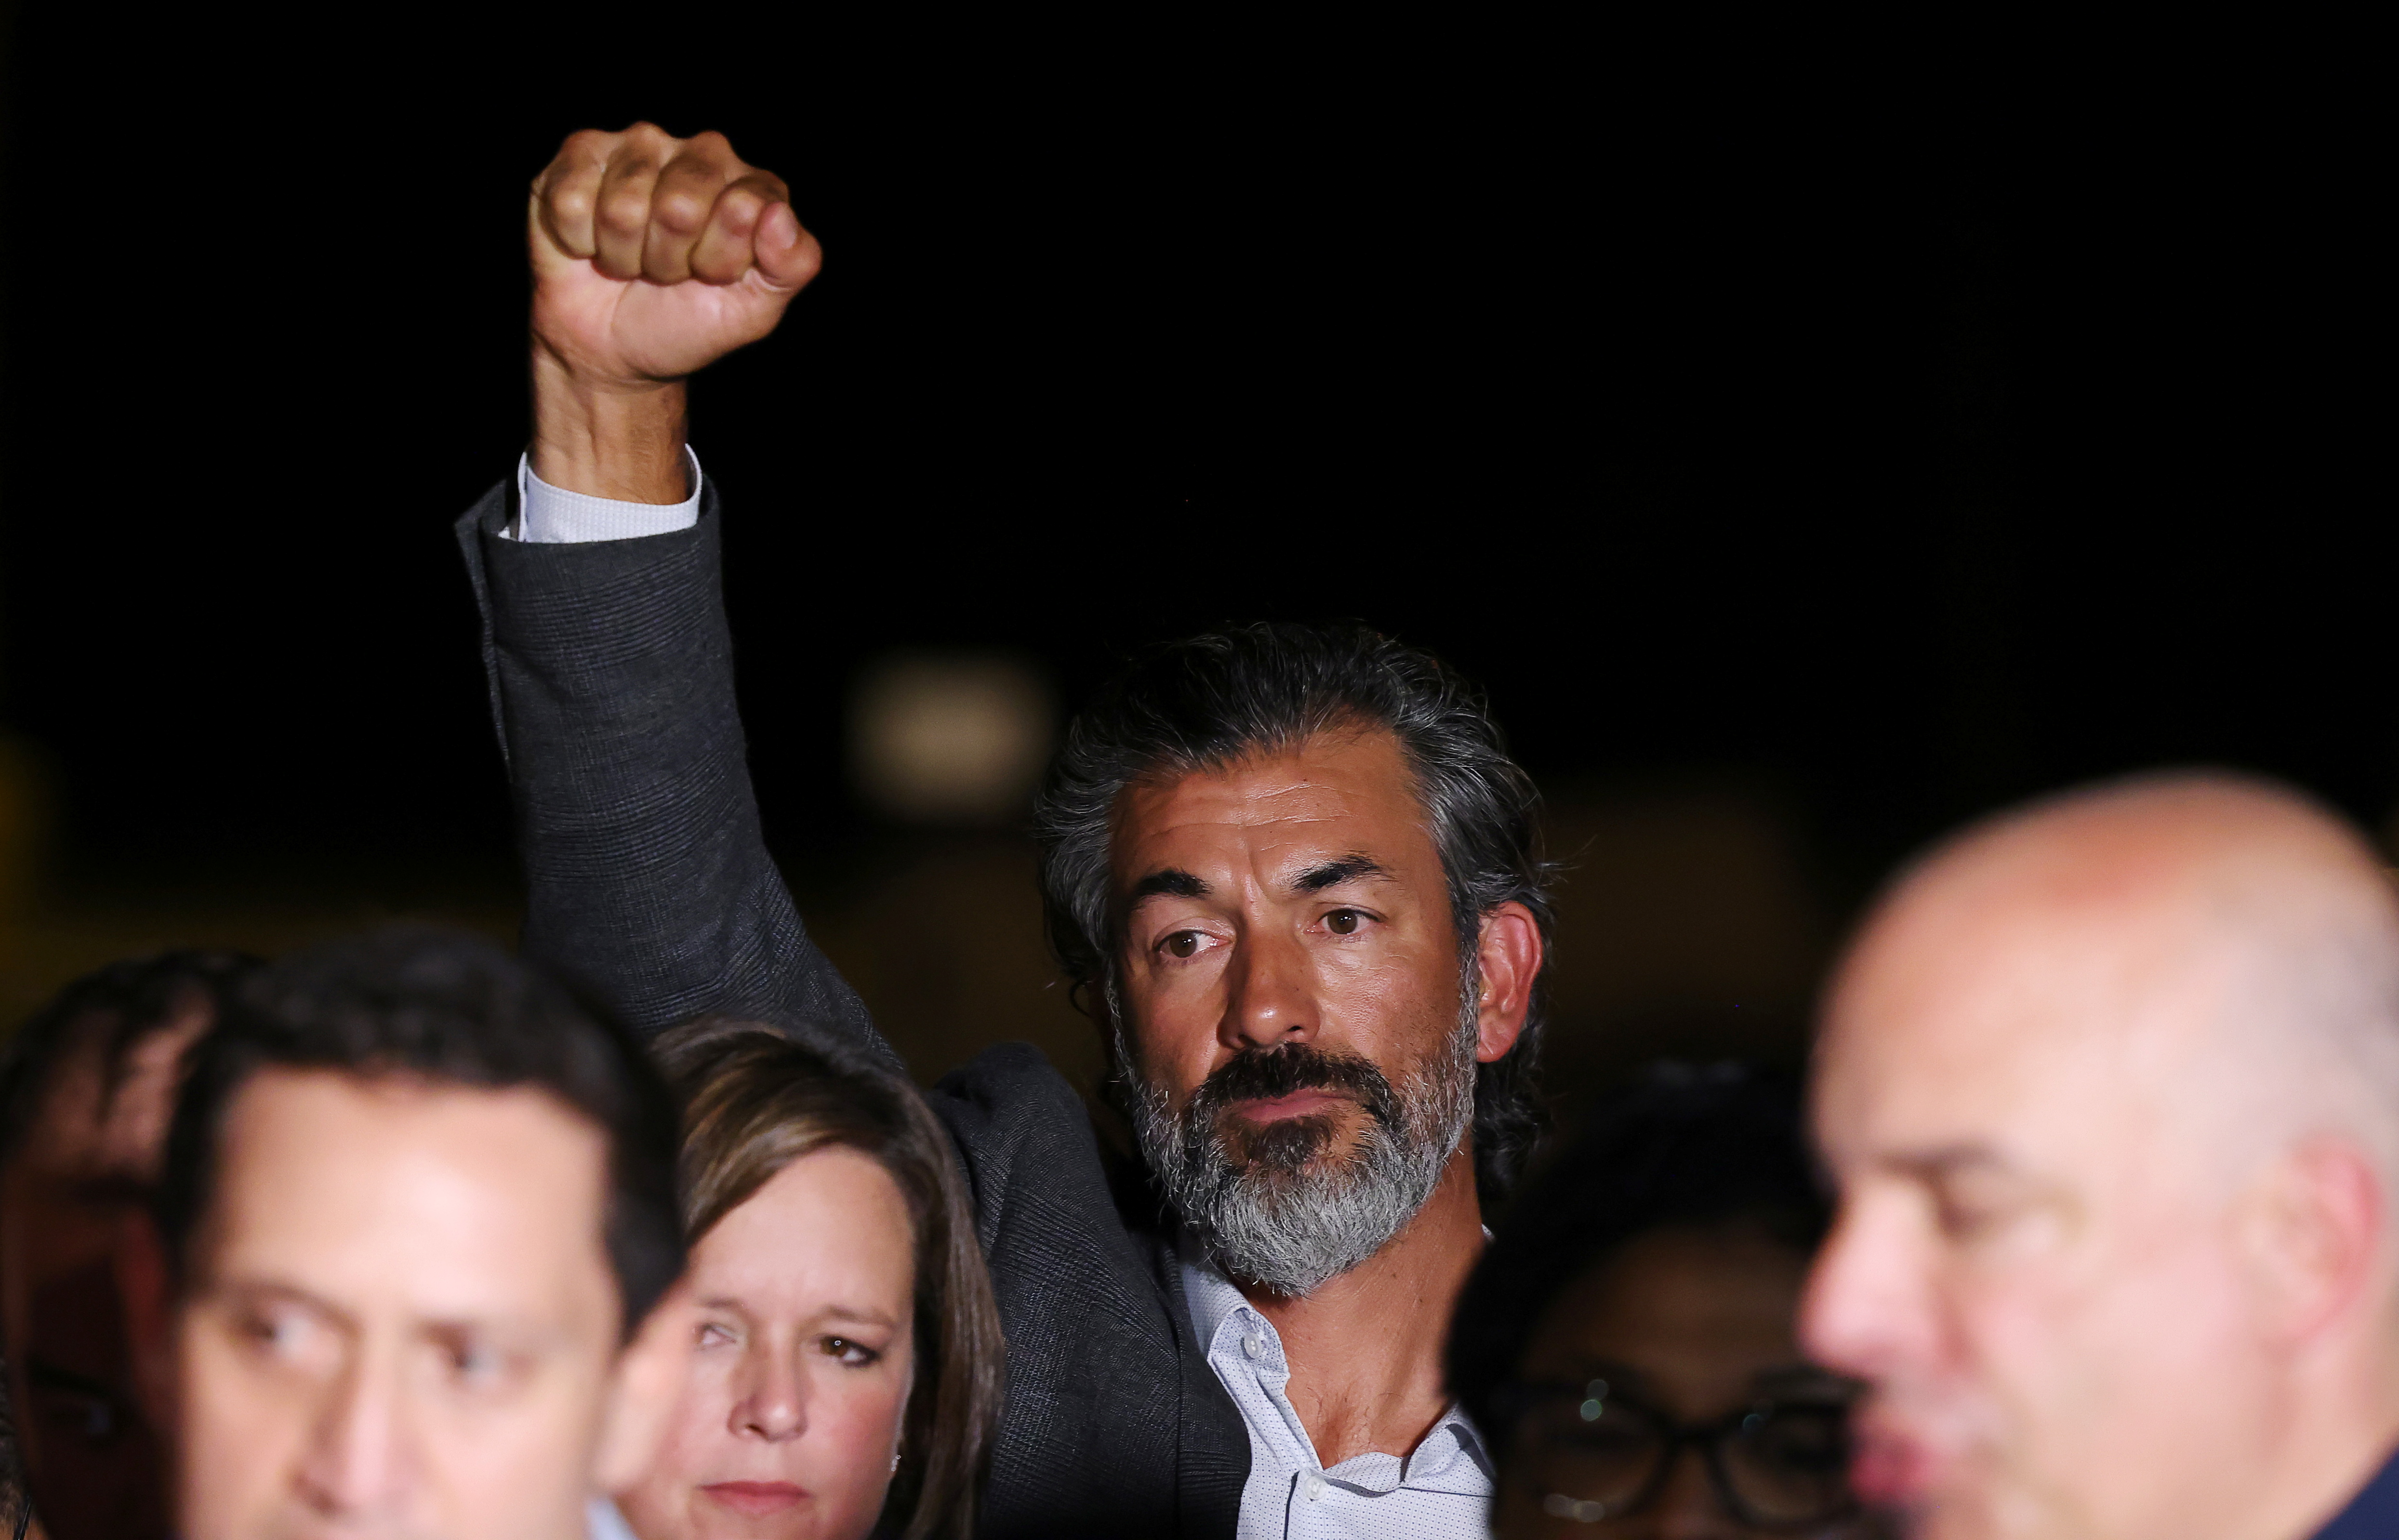 Representative Ramon Romero raises his fist as Democratic members of the Texas House of Representatives, who are boycotting a special session of the legislature in an effort to block Republican-backed voting restrictions, arrive at Dulles airport in Sterling, Virginia, U.S., July 12, 2021. REUTERS/Evelyn Hockstein